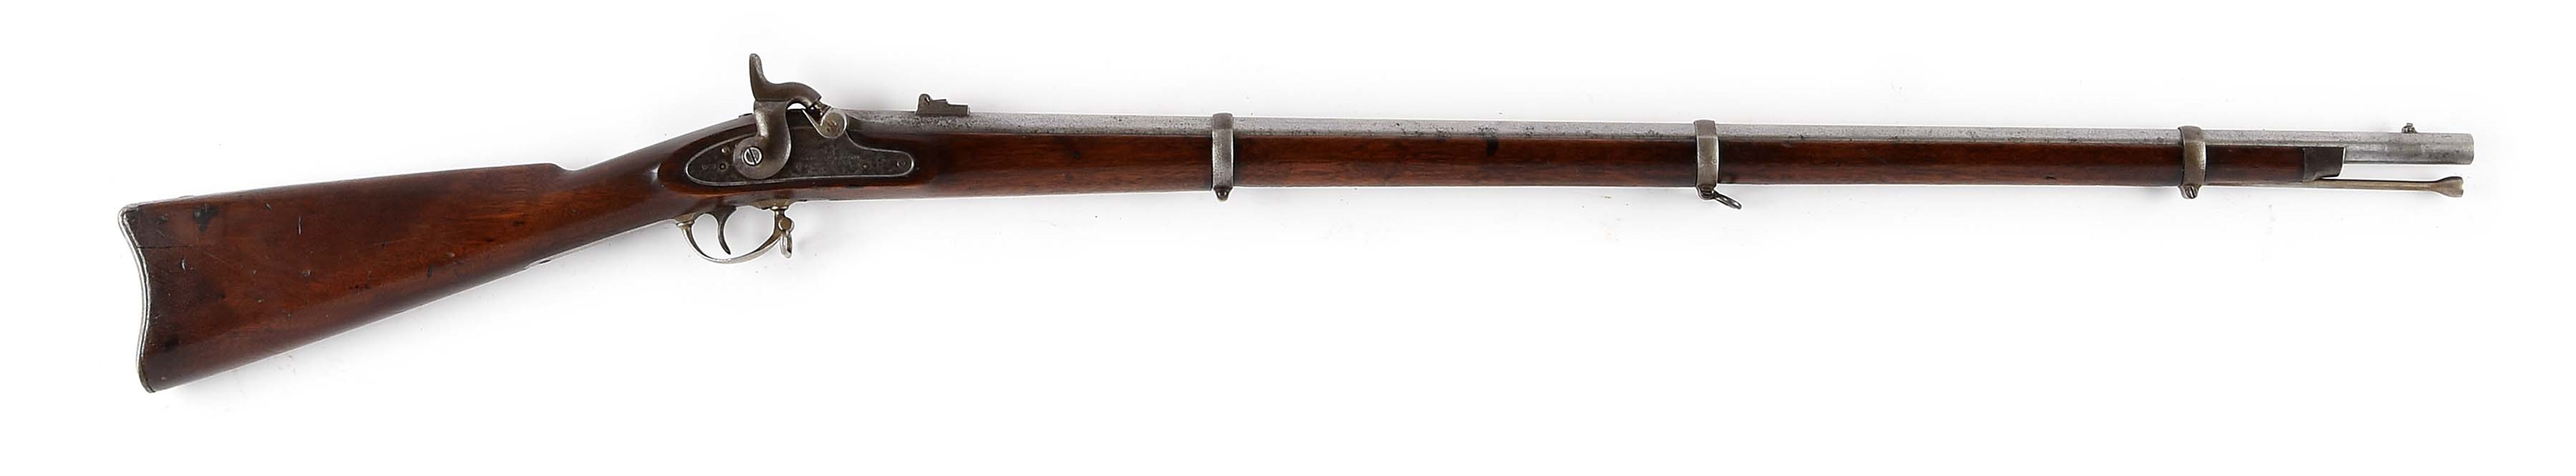 (A) NEW JERSEY MARKED COLTS PATENT U.S. MODEL 1861 PERCUSSION MUSKET.